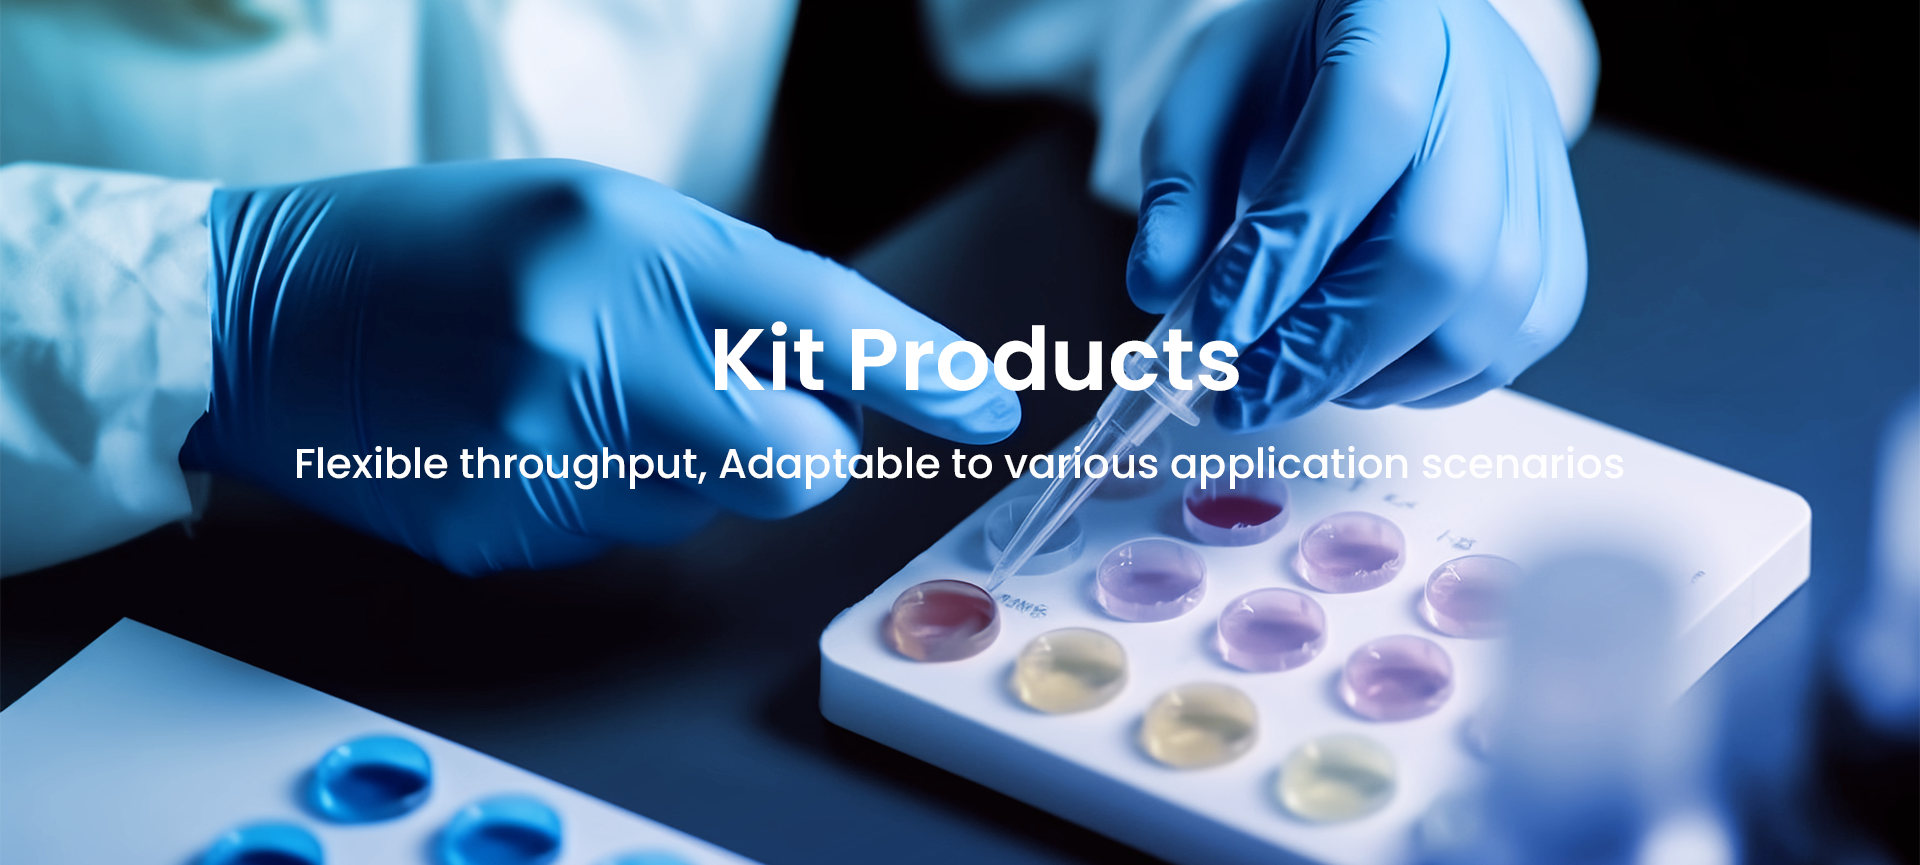 Kit products